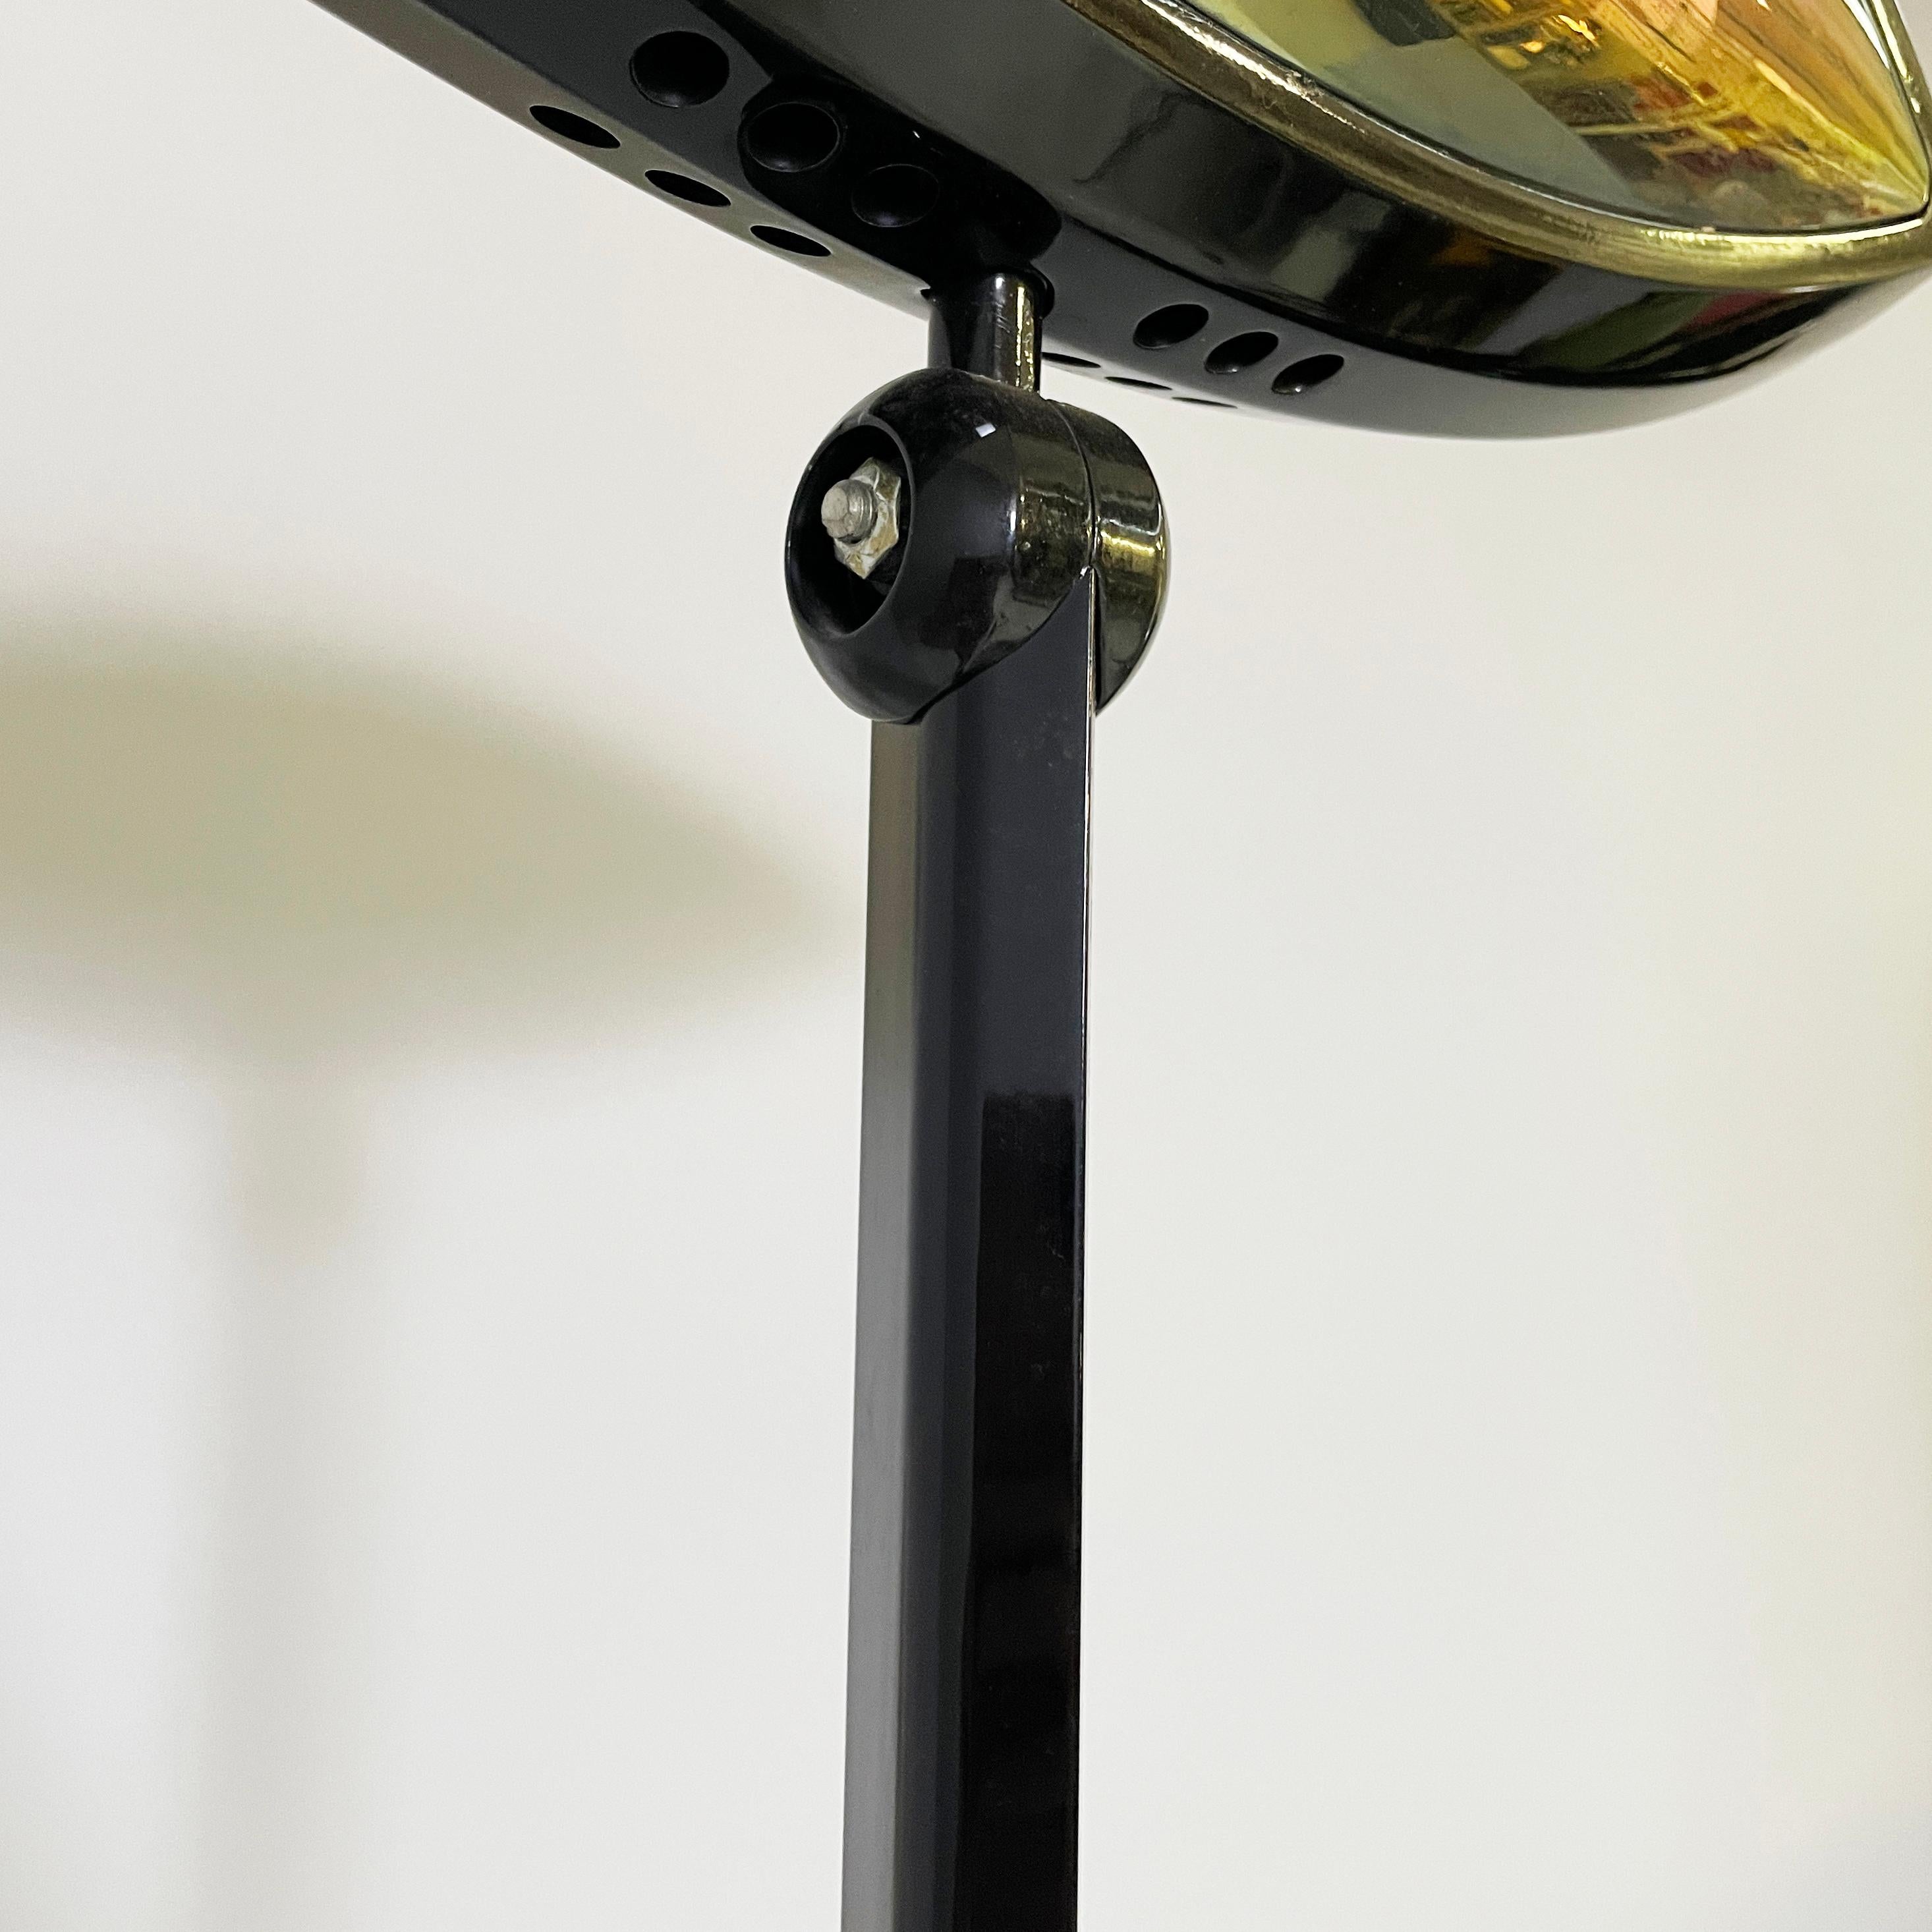 Italian modern color glass and metal Floor lamp Aeto by Lombardo for Flos, 1980s For Sale 4